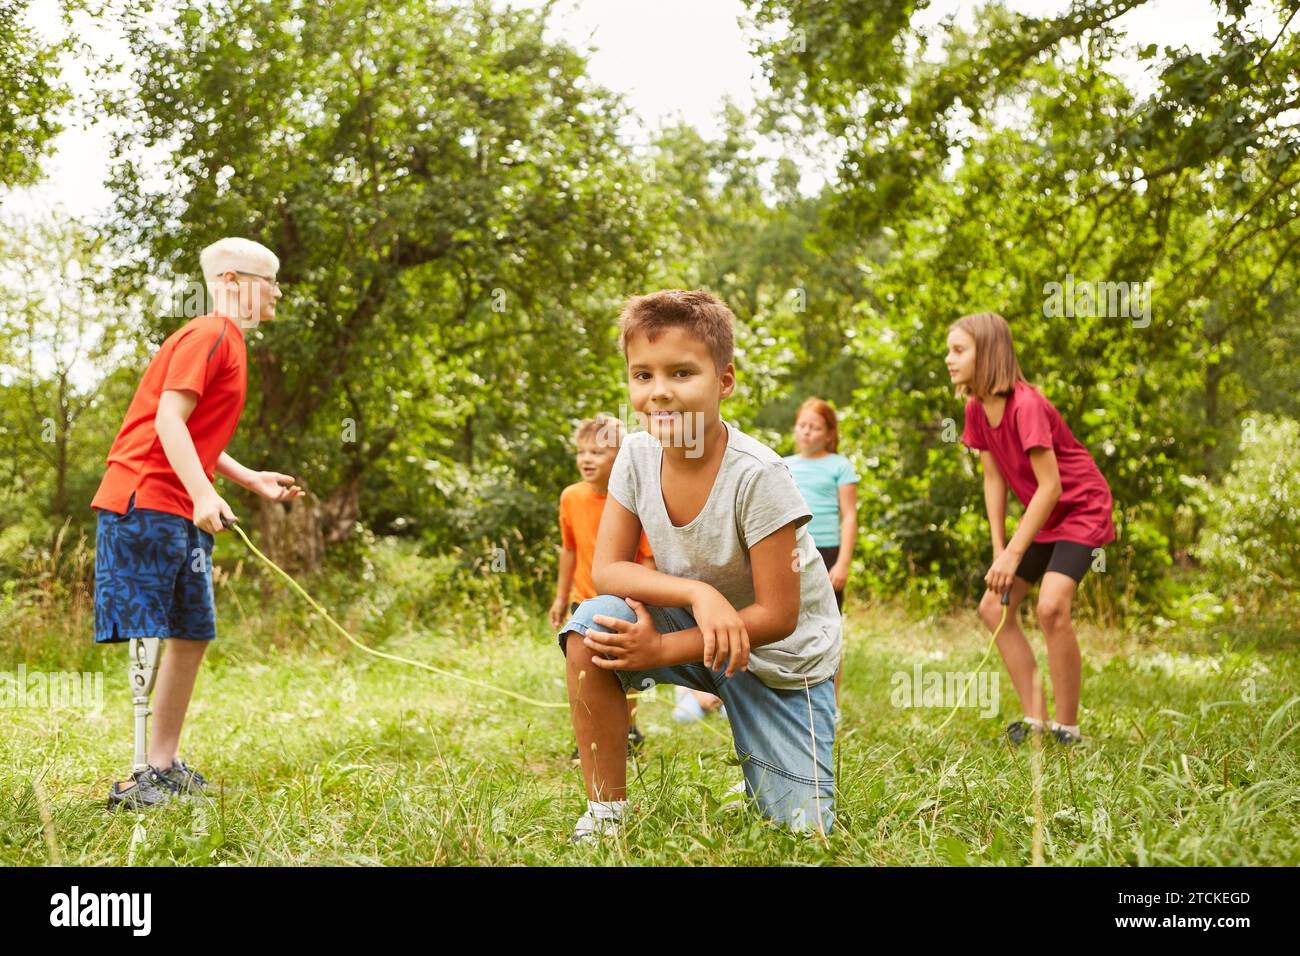 Portrait of smiling boy kneeling on grass with friends playing in background at park Stock Photo